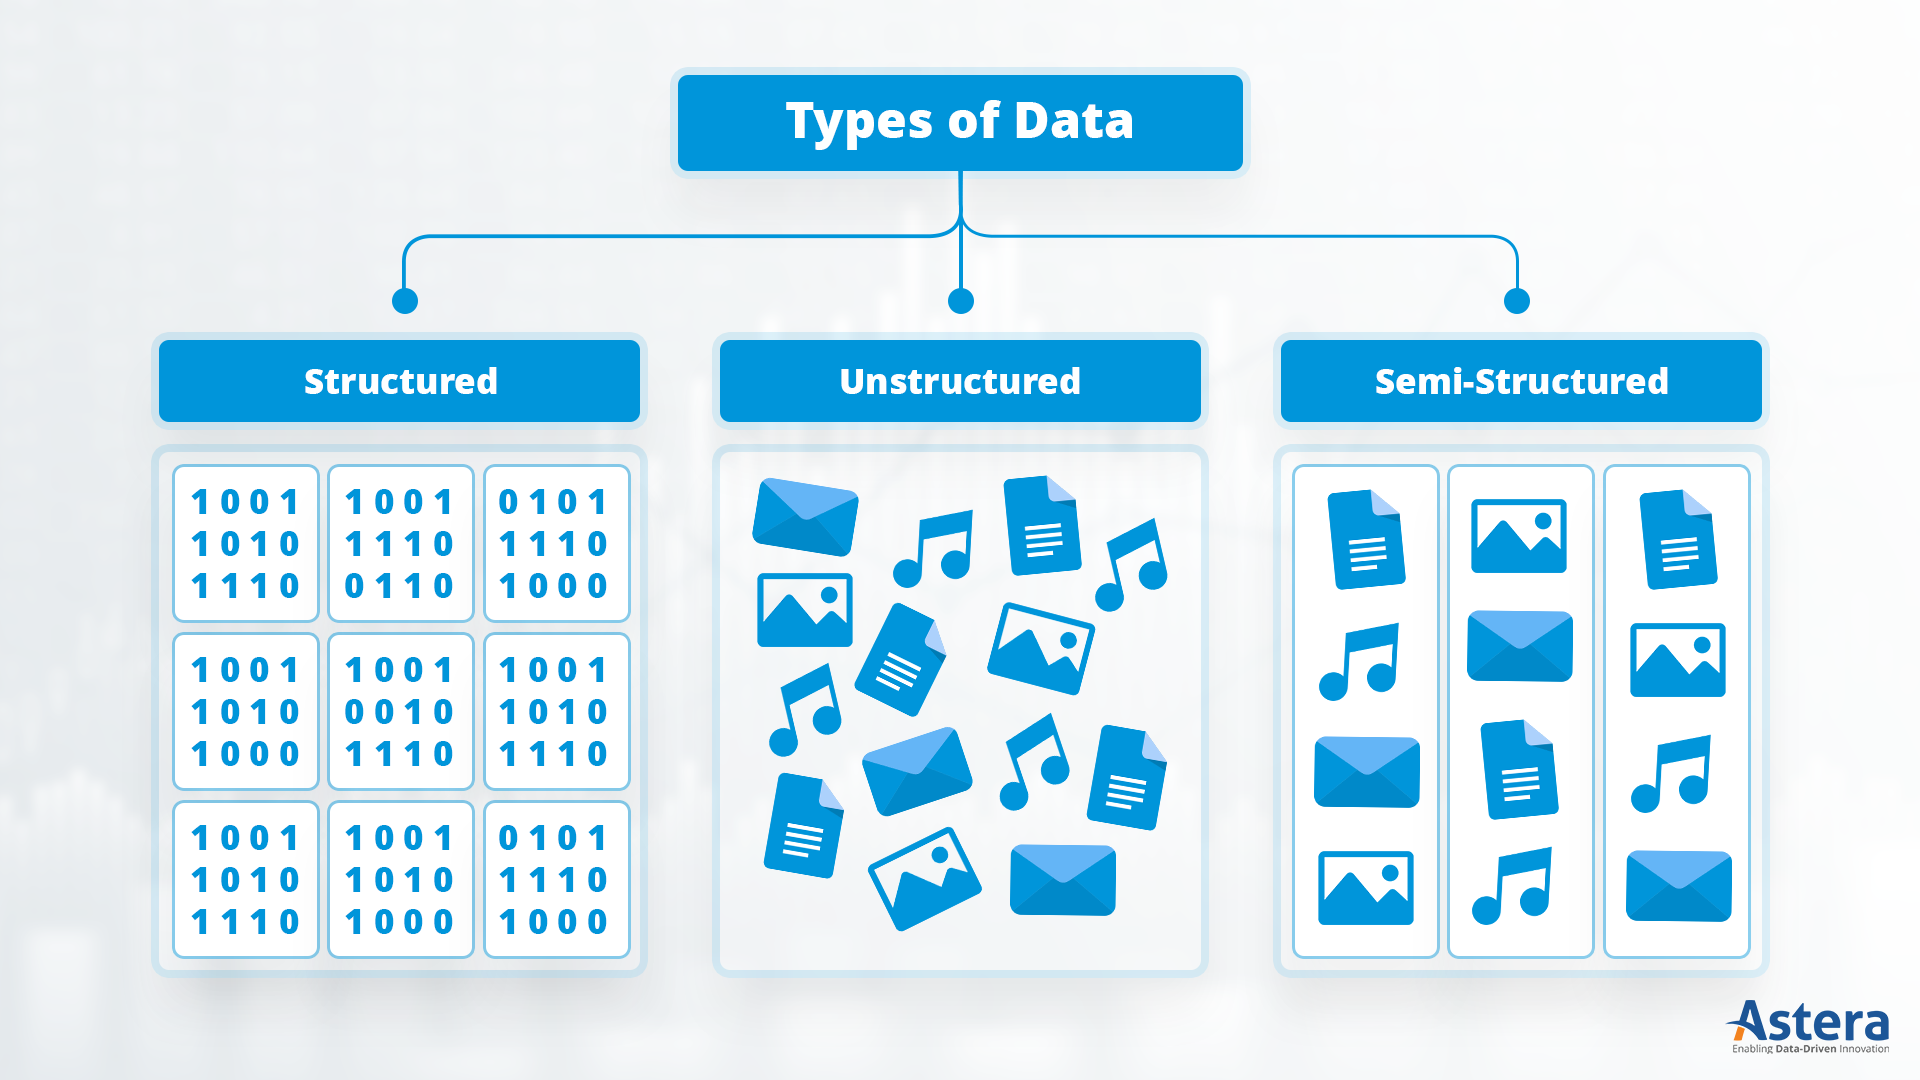 How to analyze unstructured data